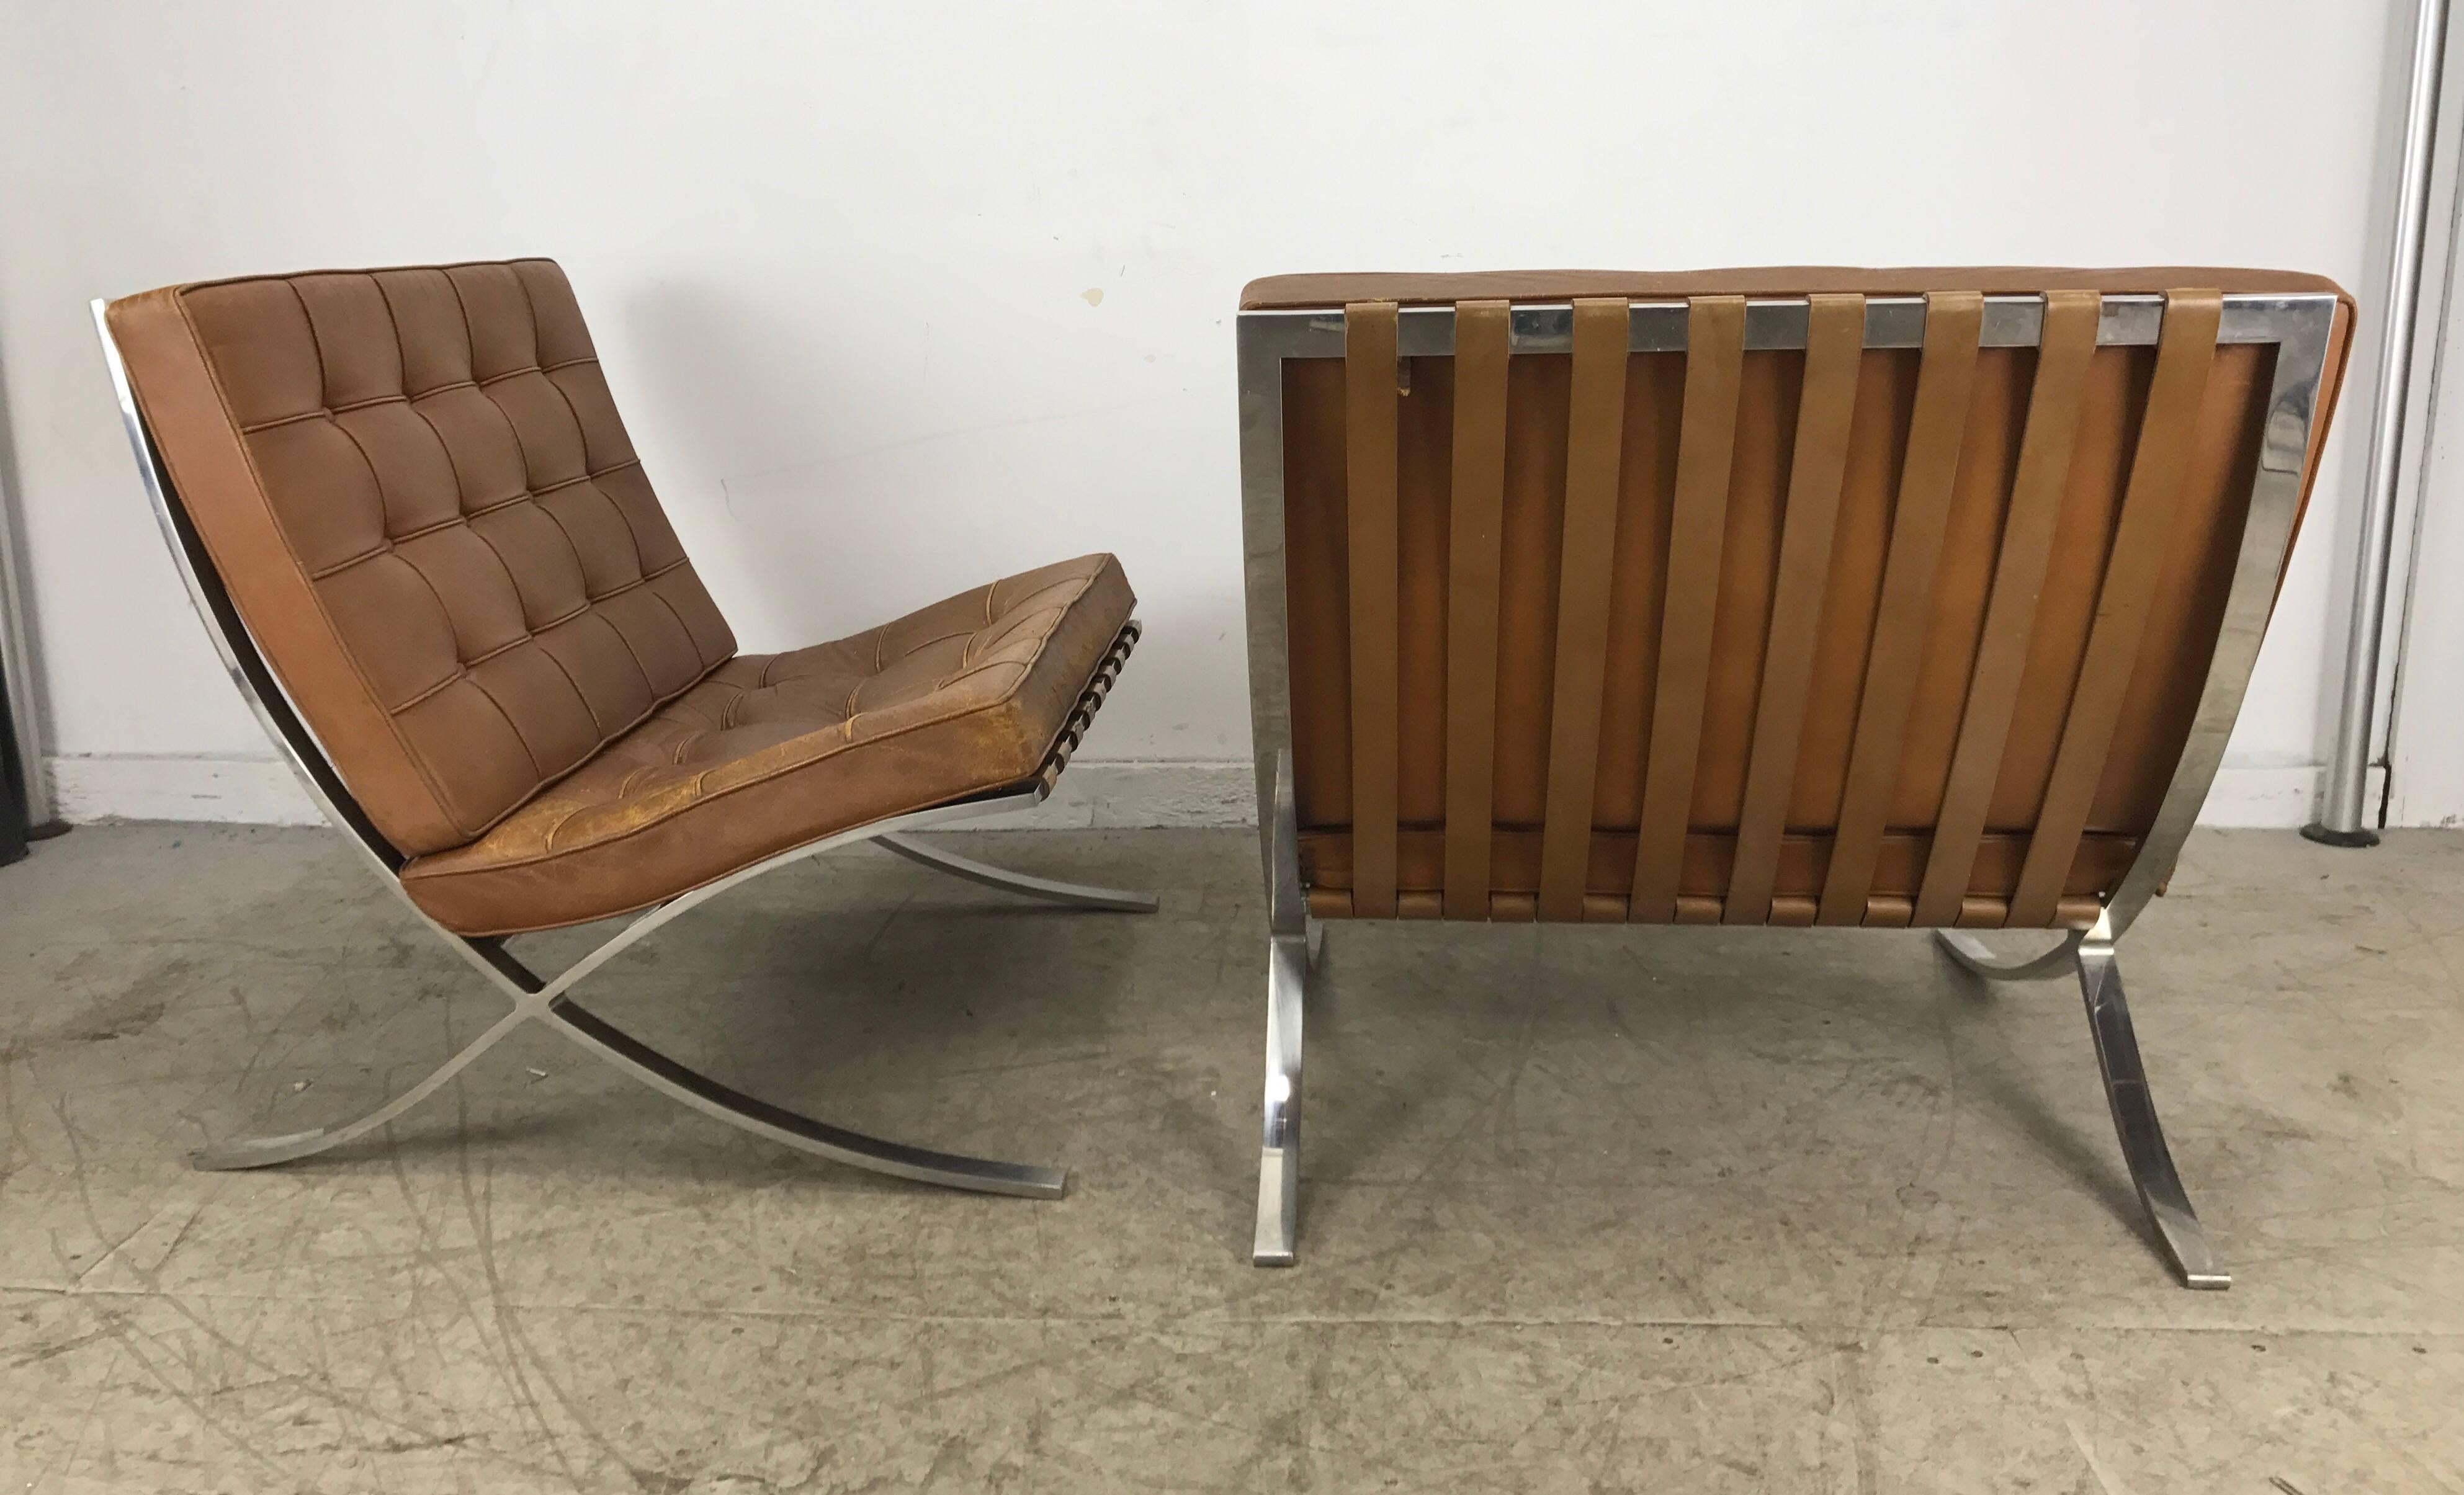 Bauhaus Pair of Knoll Barcelona Chairs Tan Leather 1960s Mies van der Rohe